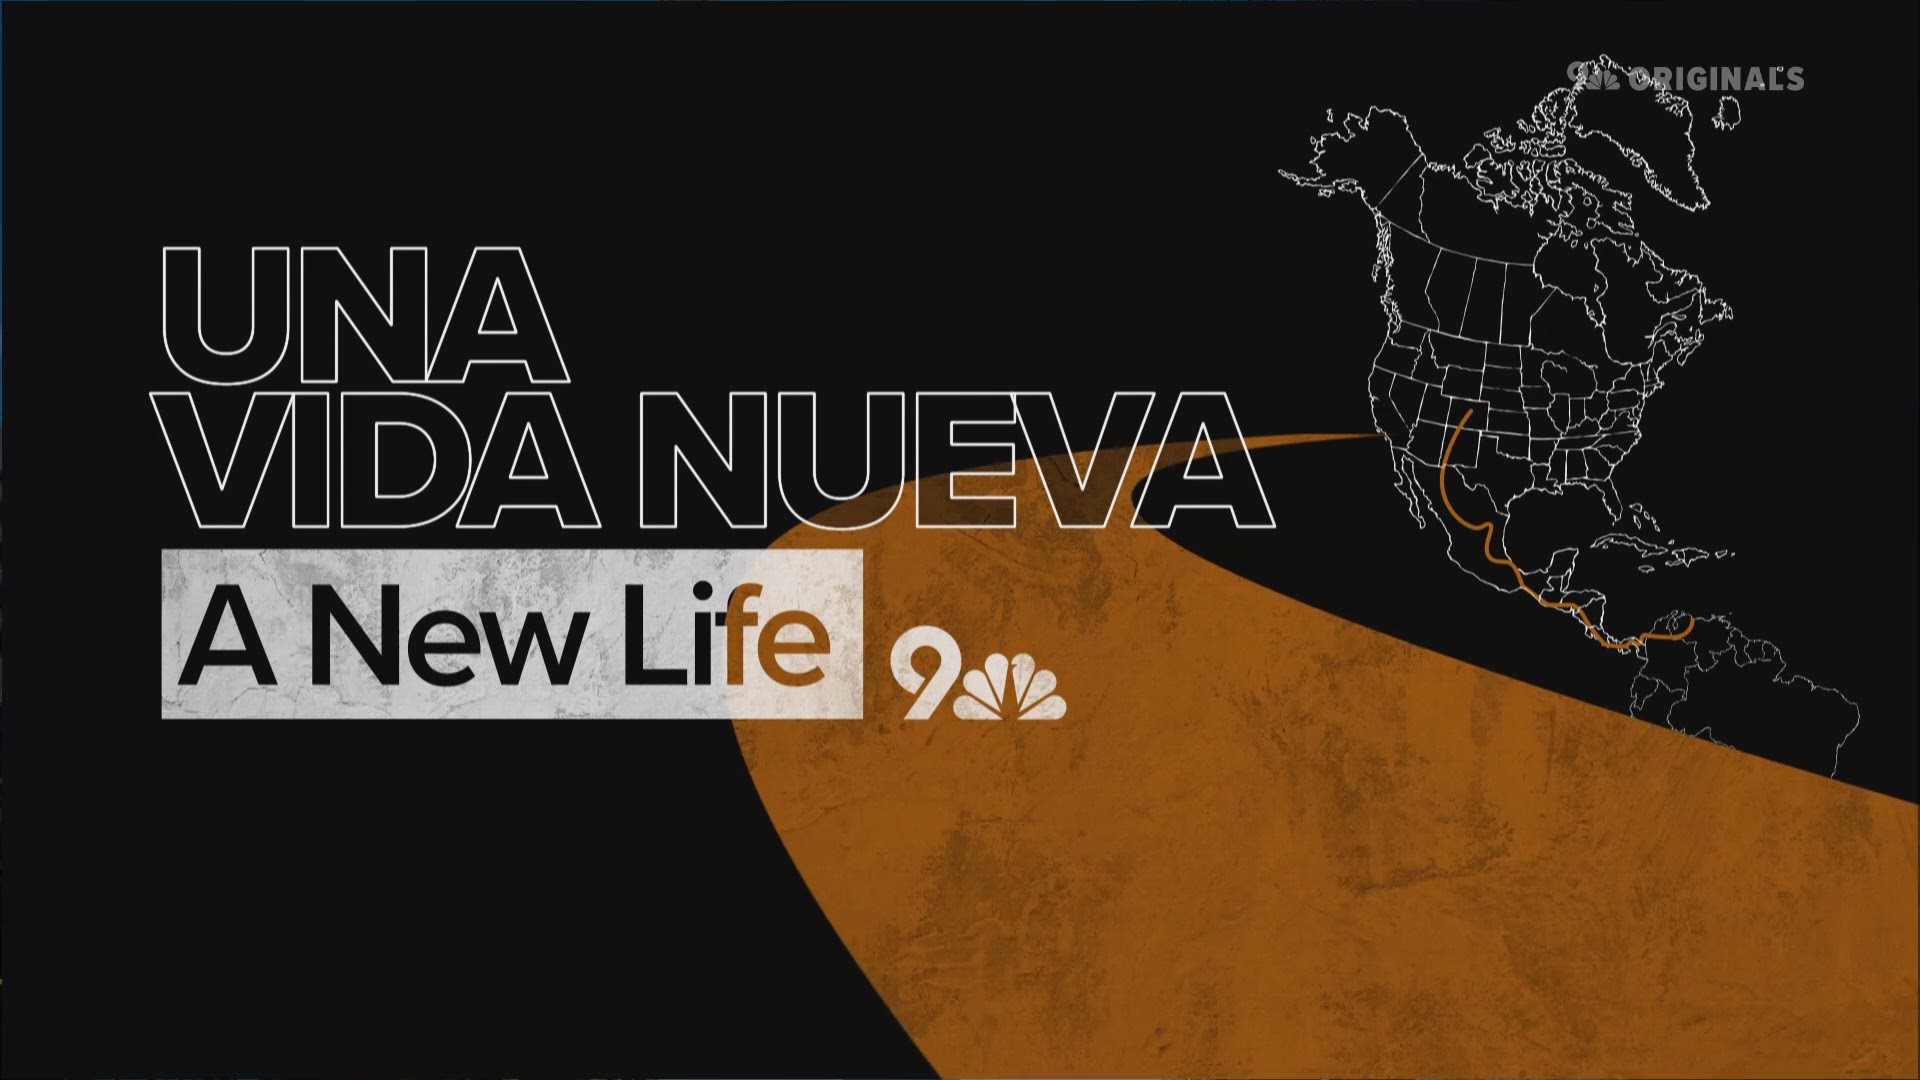 Race & Culture Reporter Angeline McCall and Photojournalist Chris Hansen started working on a documentary a year ago about migrants called "Una Vida Nueva".